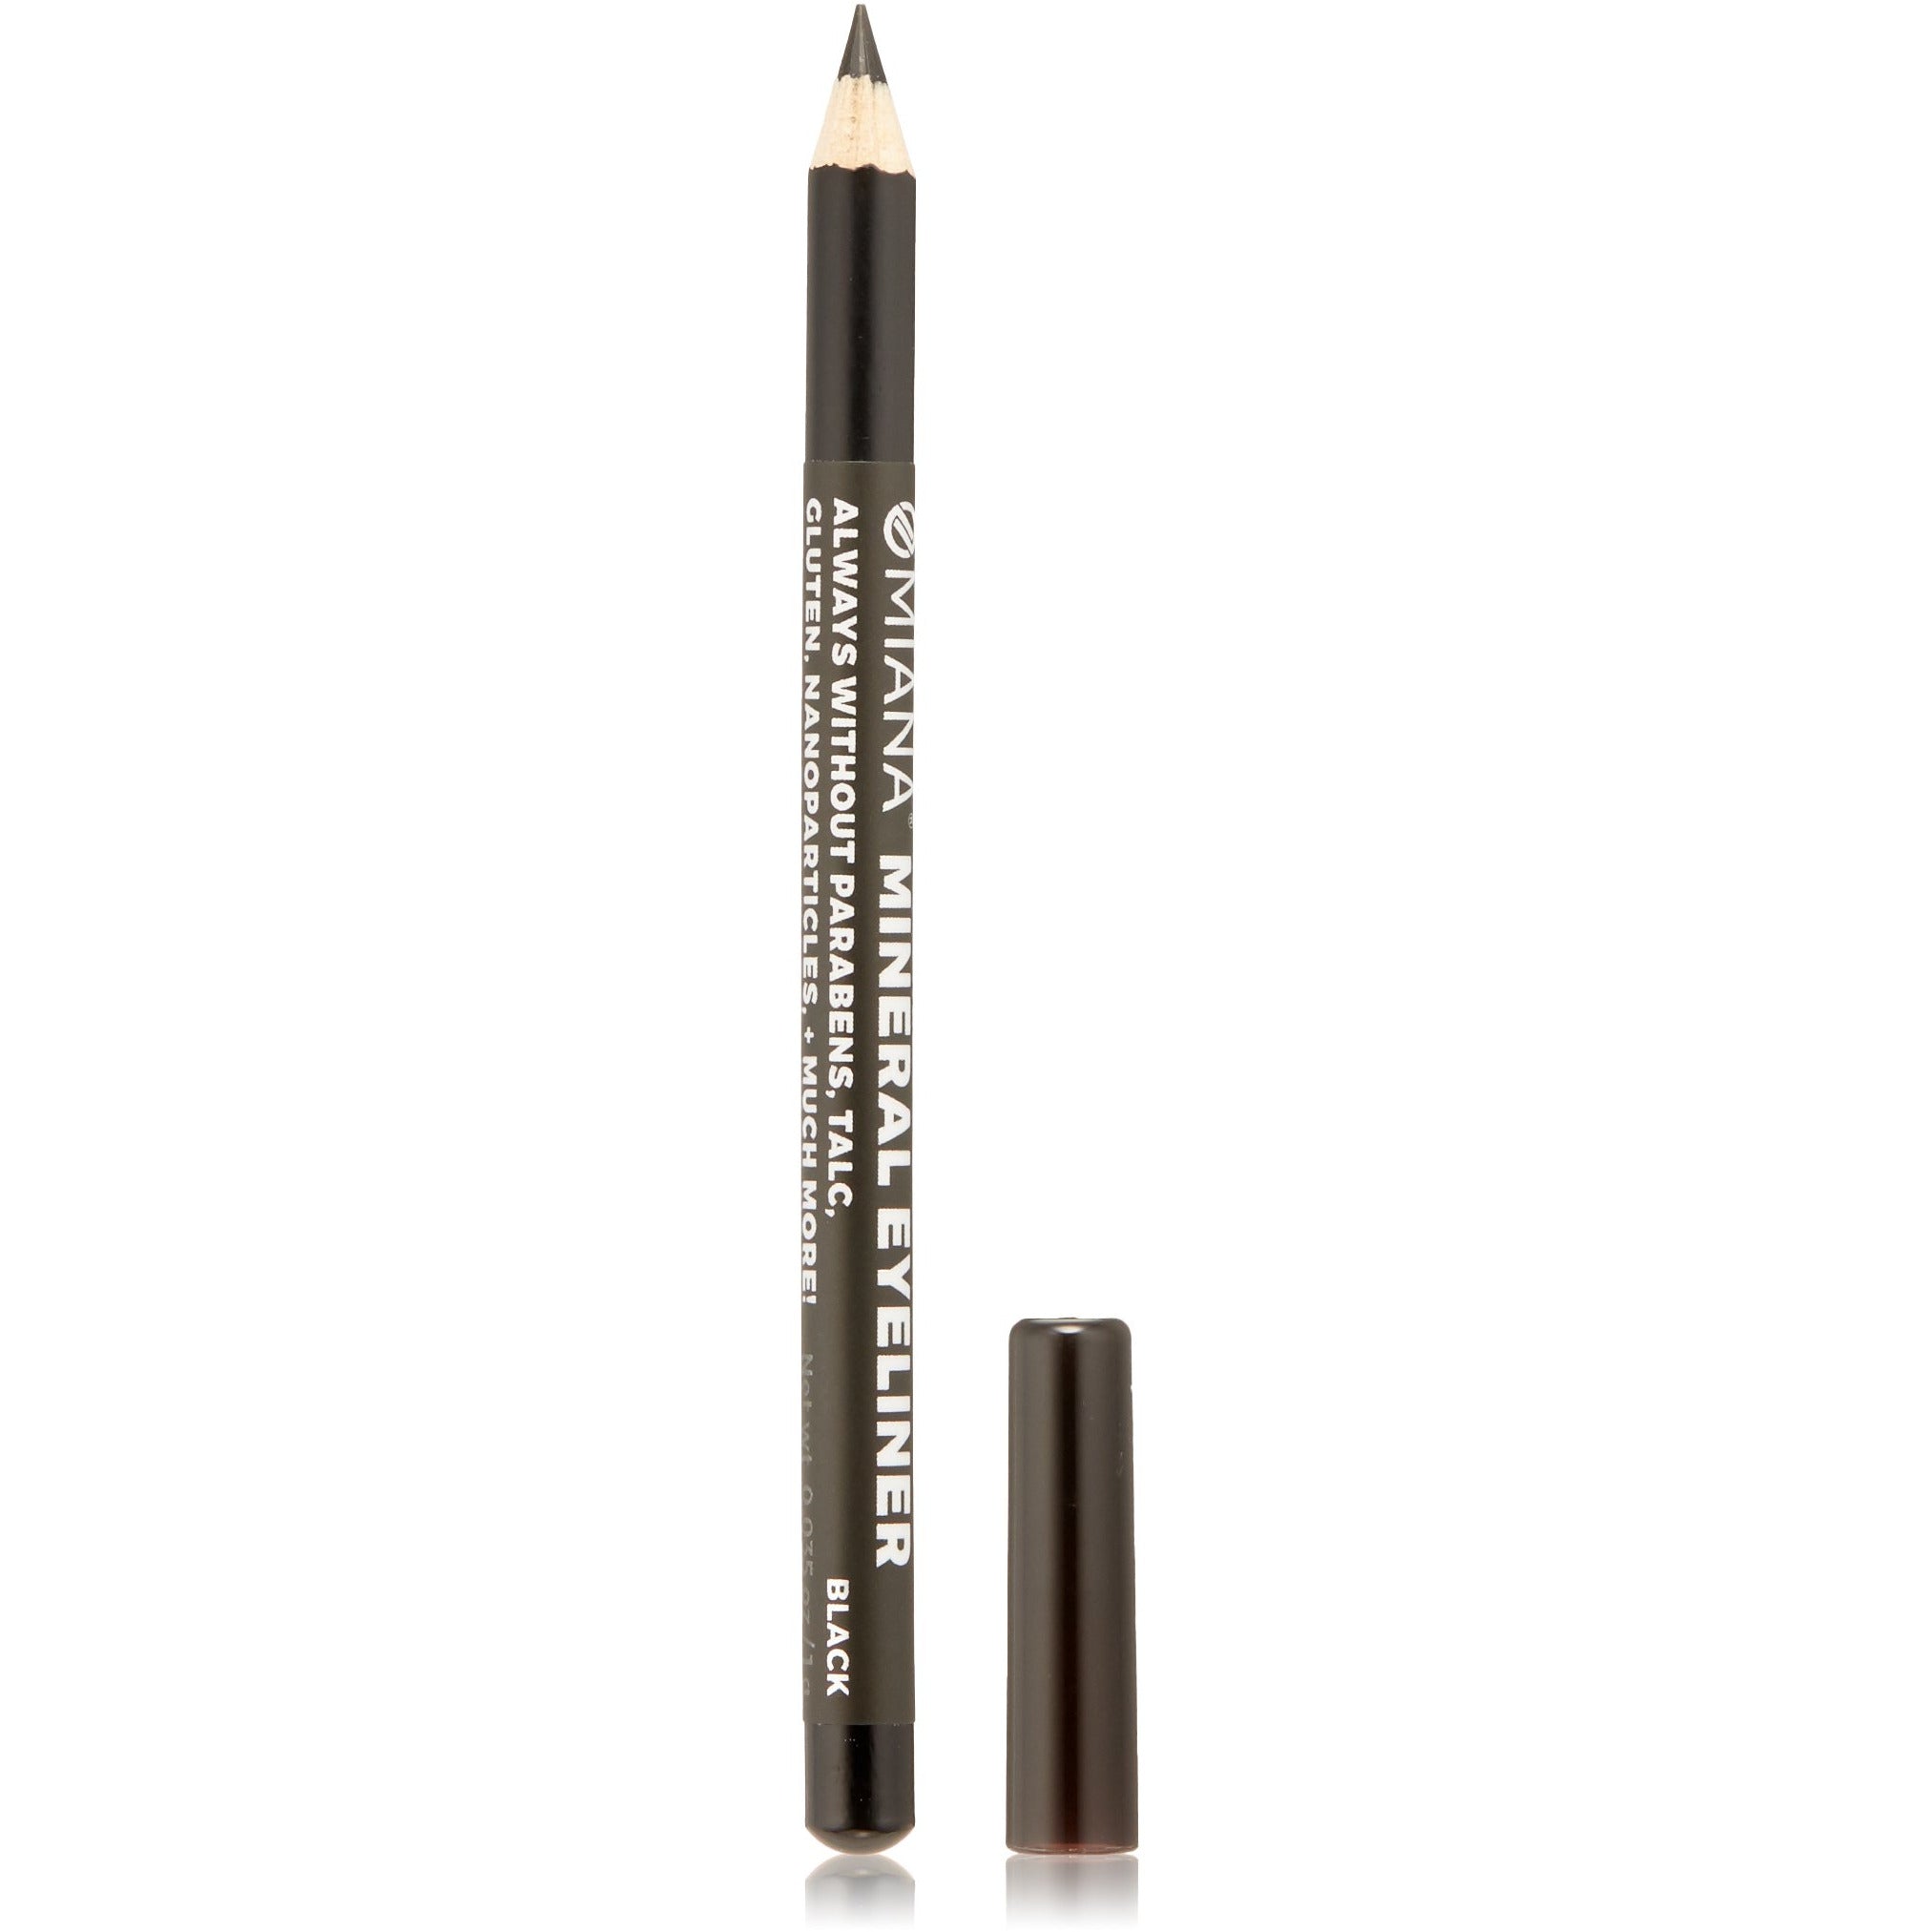 Titanium Dioxide-Free and Mica-Free Mineral Pencil Eyeliner